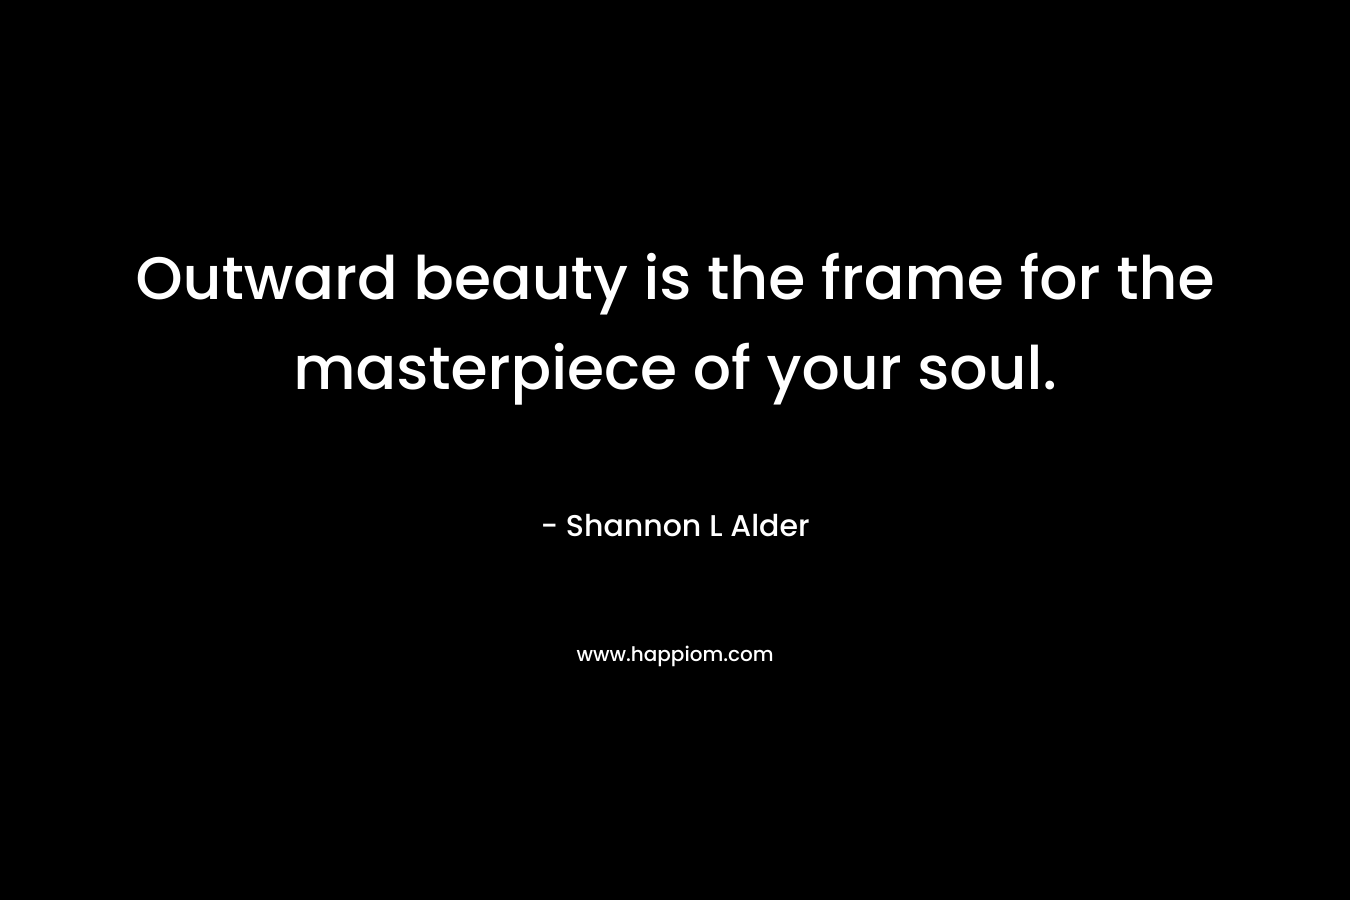 Outward beauty is the frame for the masterpiece of your soul. – Shannon L Alder